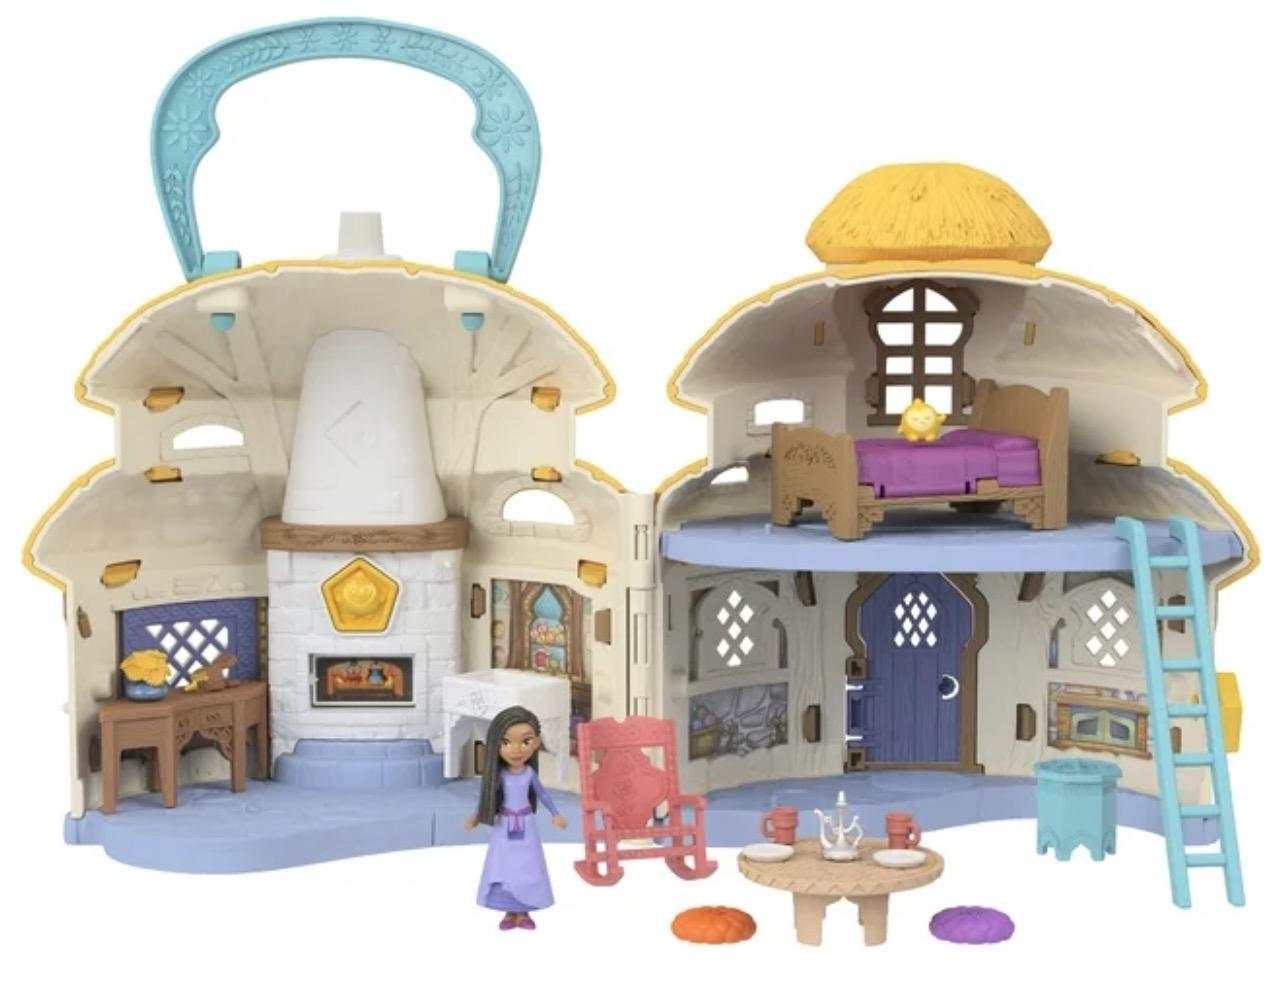 Mattel Disney Wish Cottage Home Playset with Asha of Rosas Mini Doll for $5.08